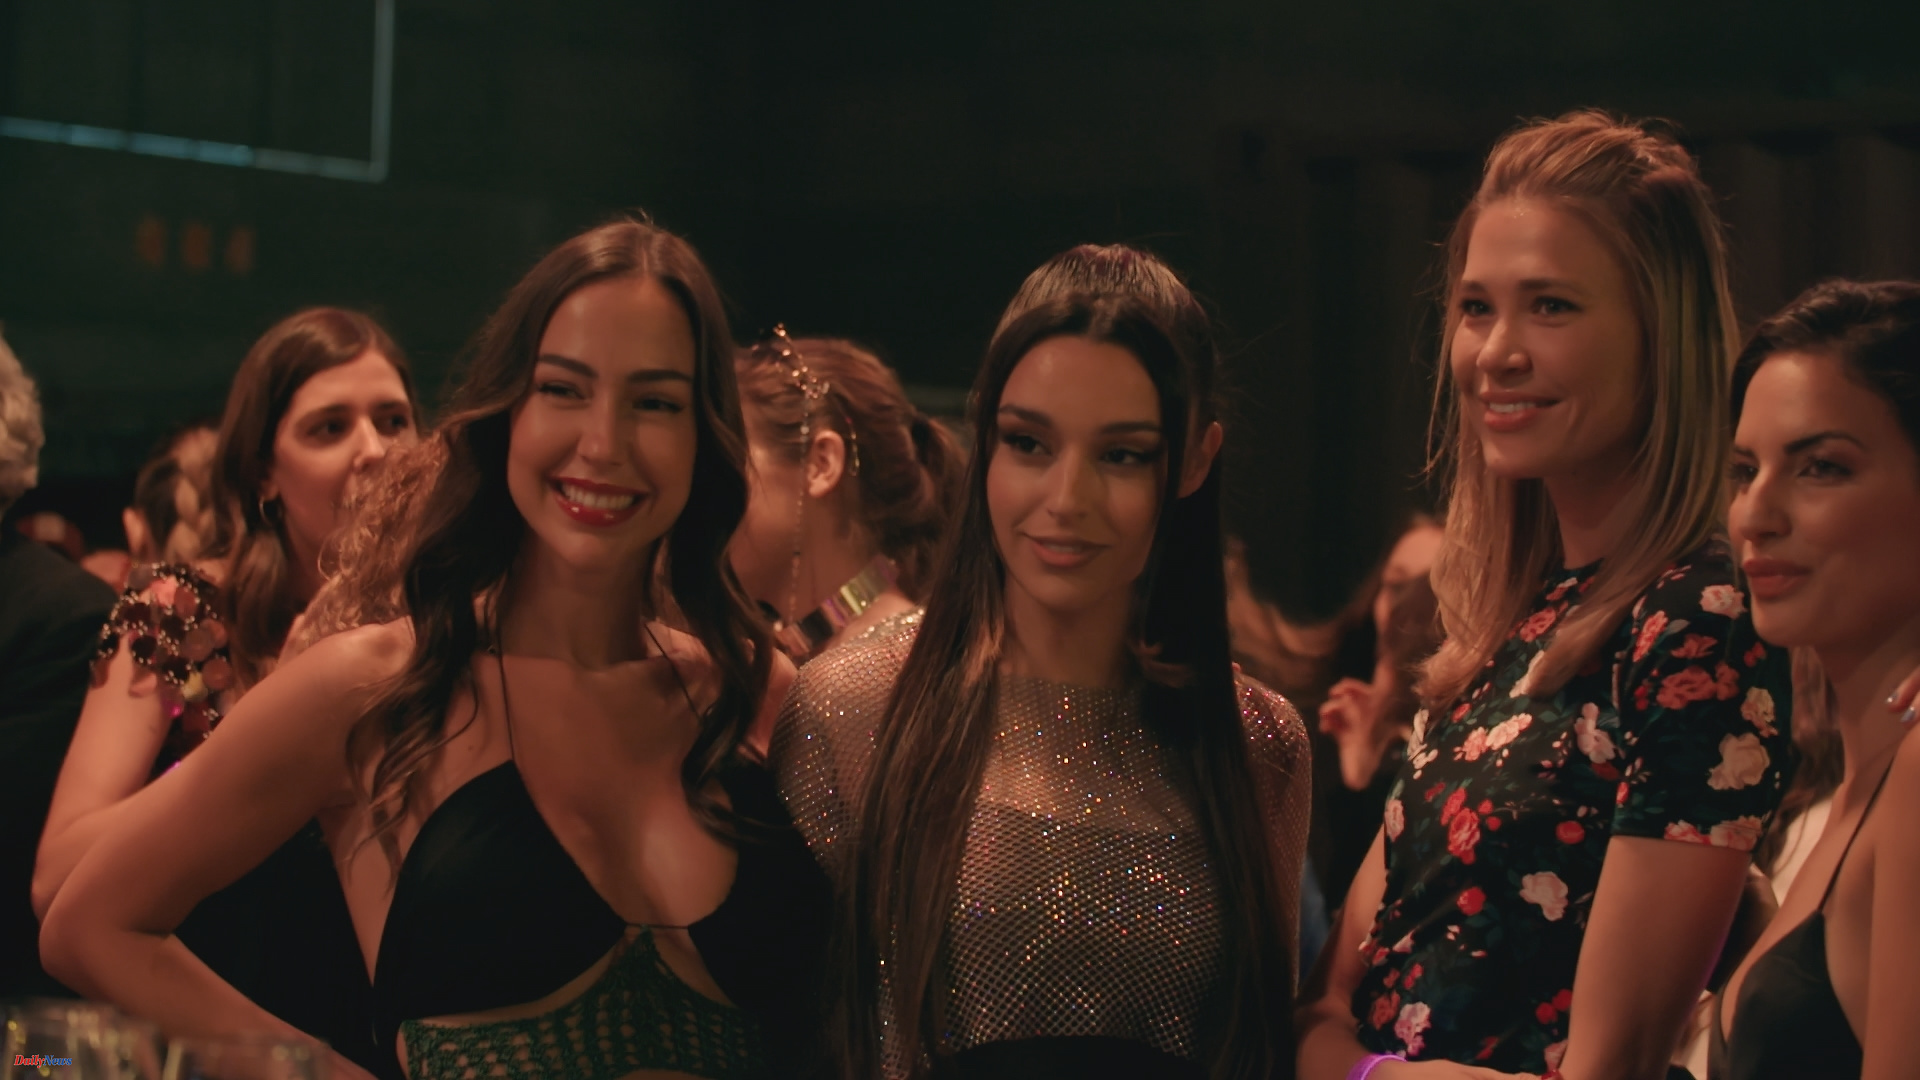 Mediaset WAGs: they also play, a docureality against prejudice, but in an artificial world